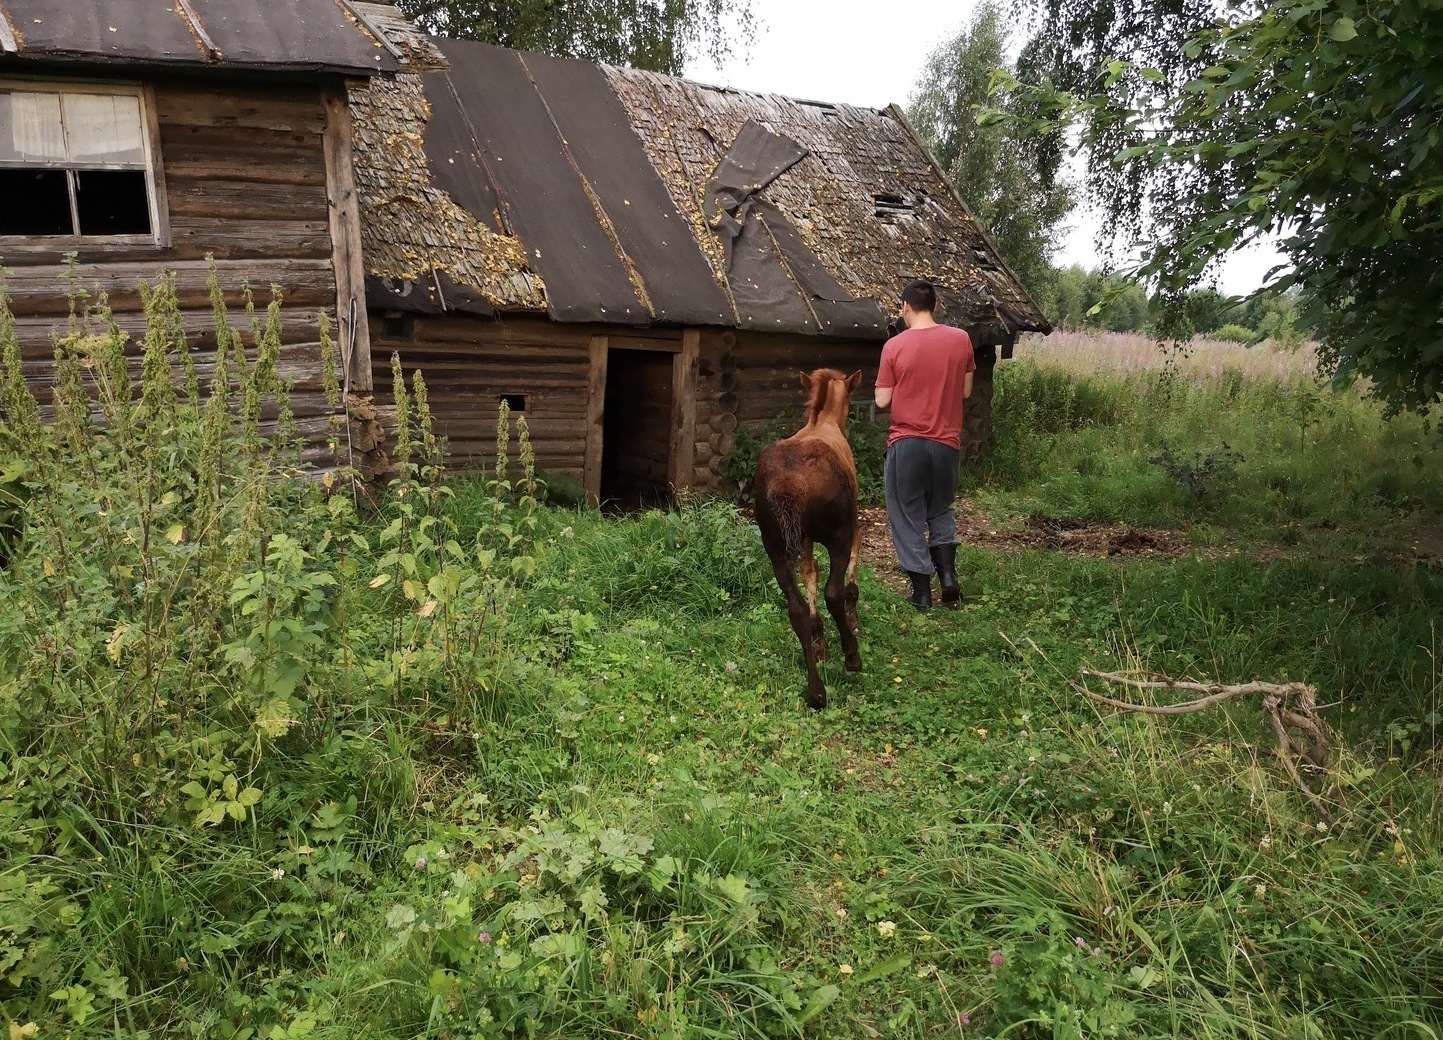 Horses living in the abandoned house, Russia